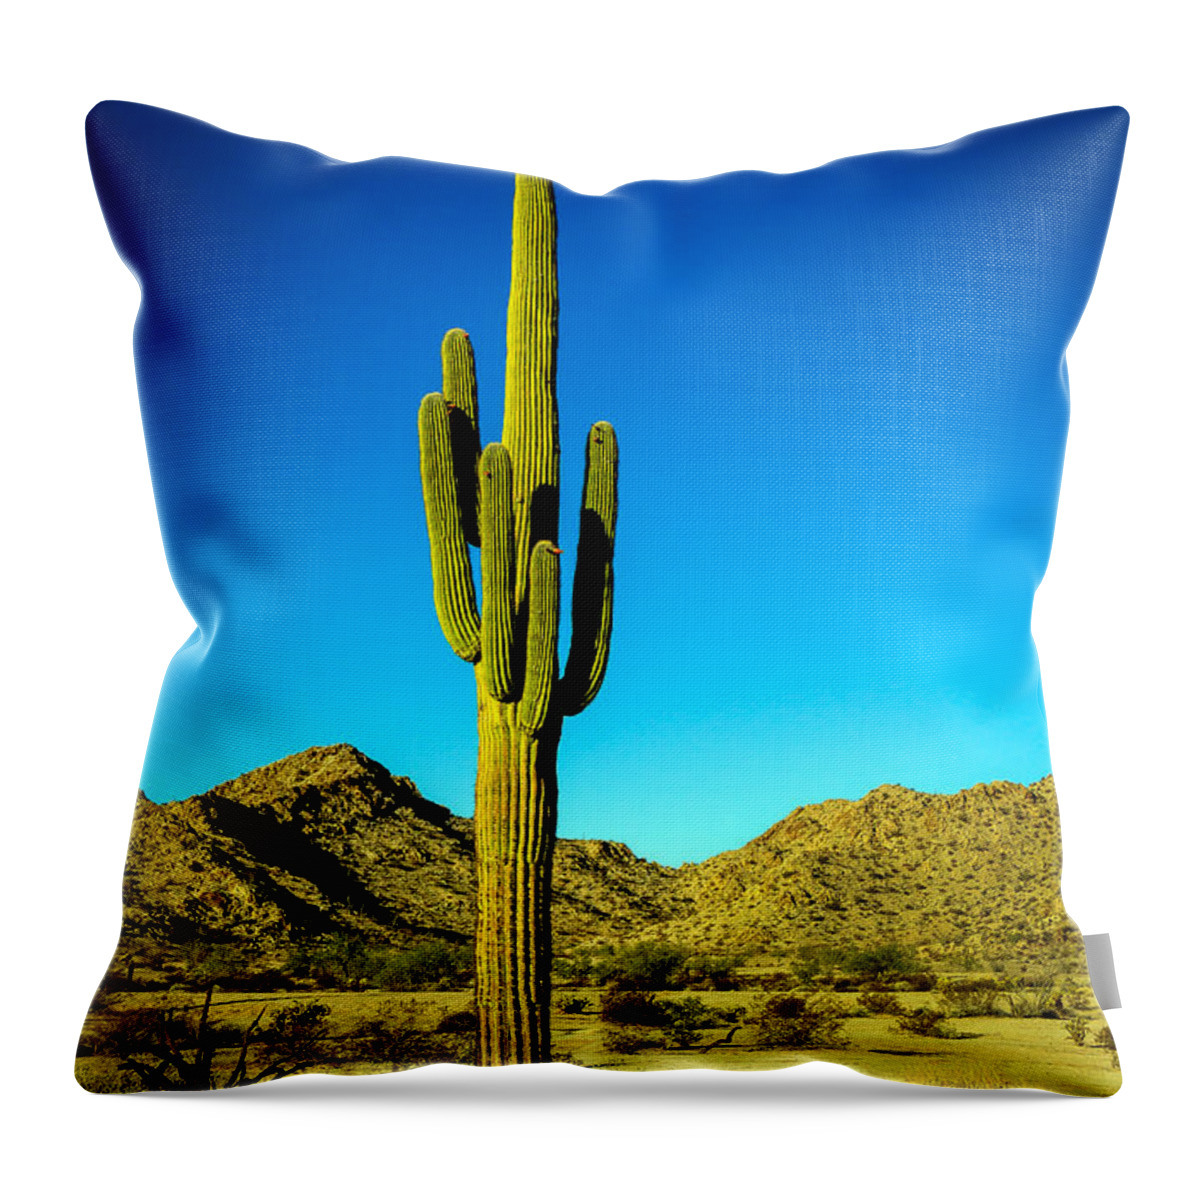 Cactus Throw Pillow featuring the photograph Lonesome Saguaro by Robert Bales